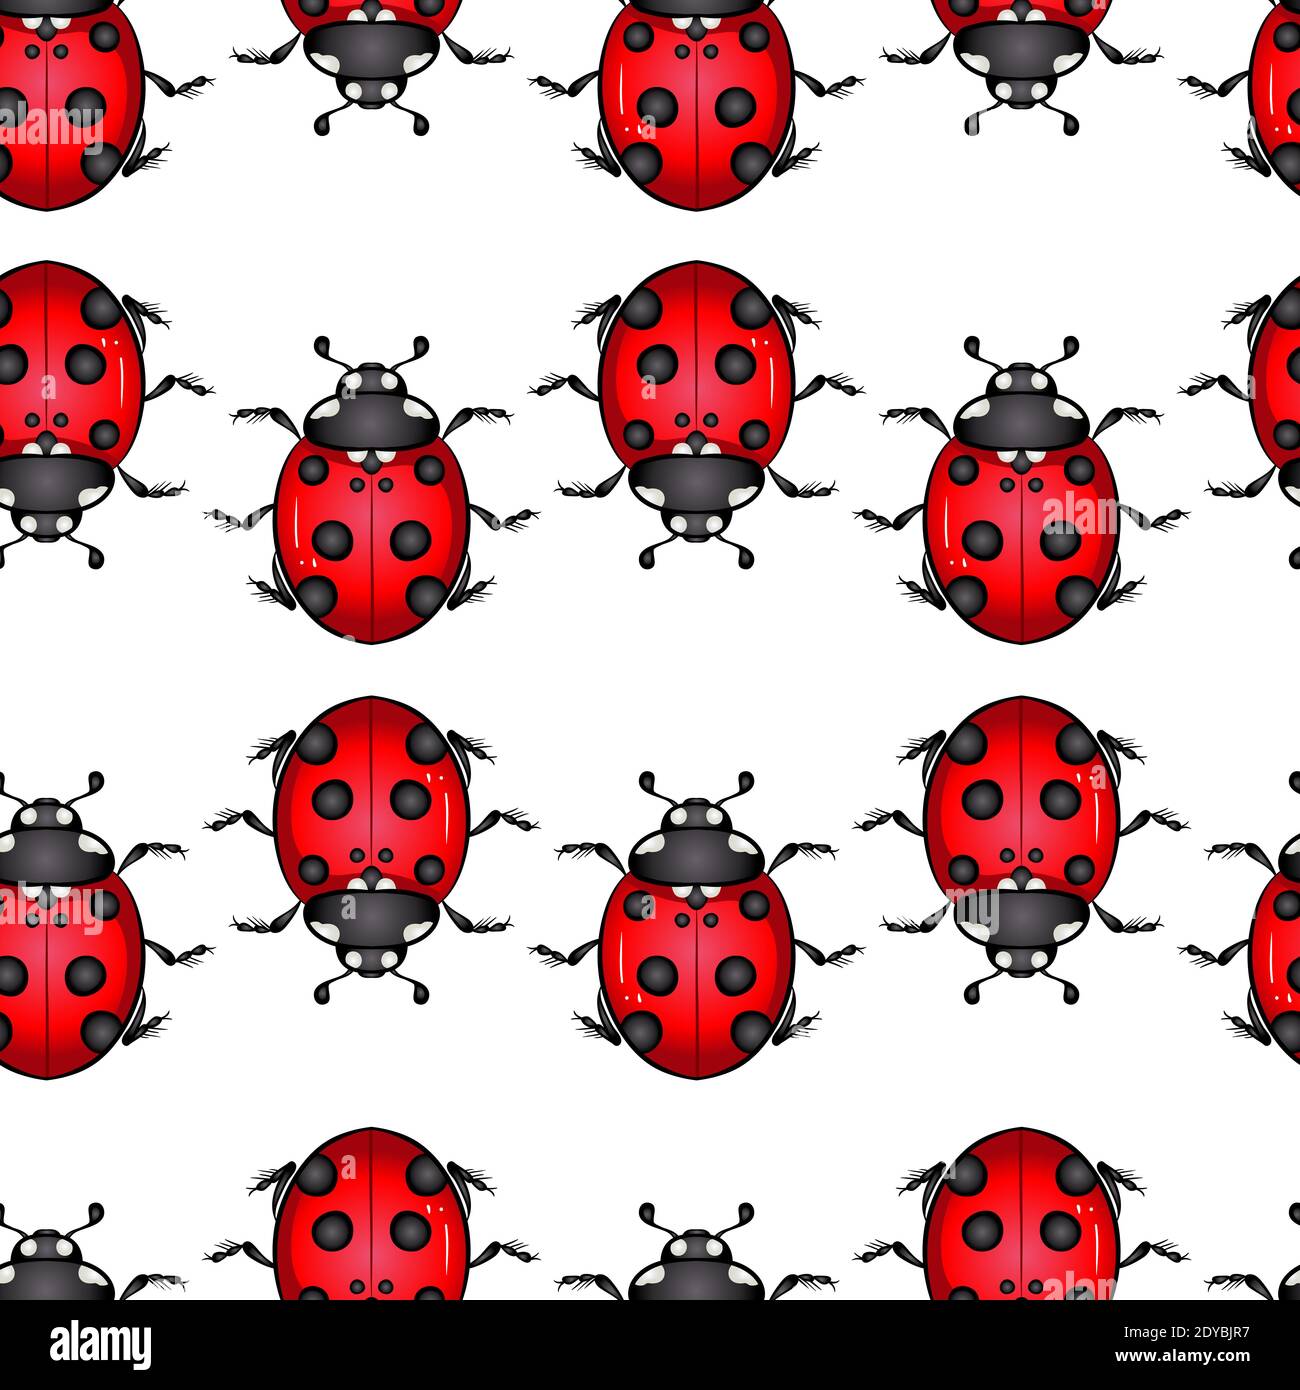 Cartoon colorful bright ladybug beetle isolated on white background. Seamless pattern. Vector illustration in hand drawn style. Texture for print, banner, textile, wrapping paper Stock Vector